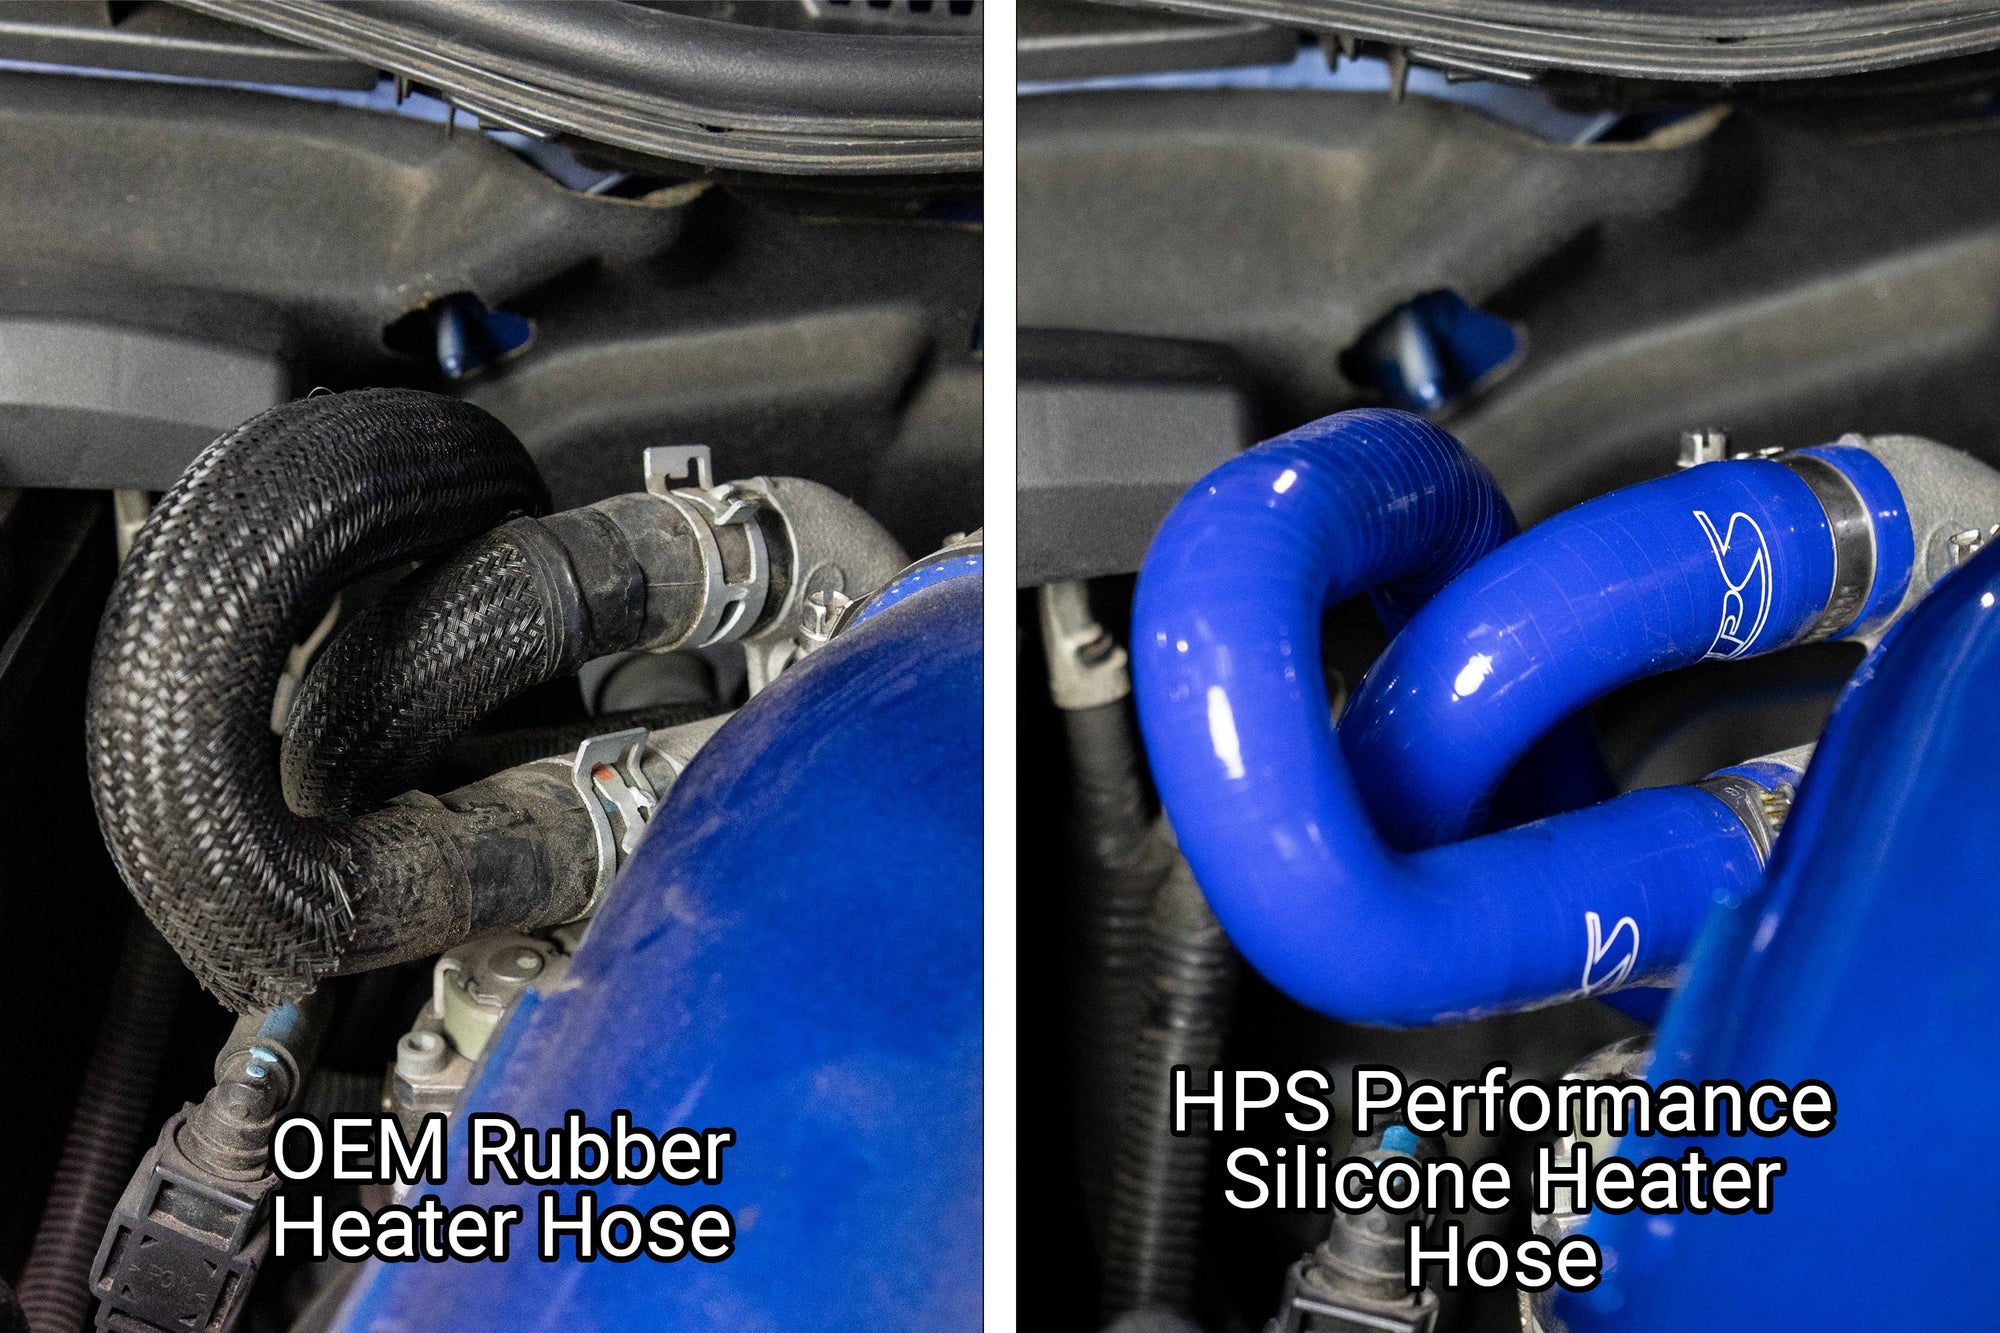 HPS silicone heater hoses replace 2007-2015 Lexus GS350 3.5L V6 OEM part number 87245-53180, 87245-53130